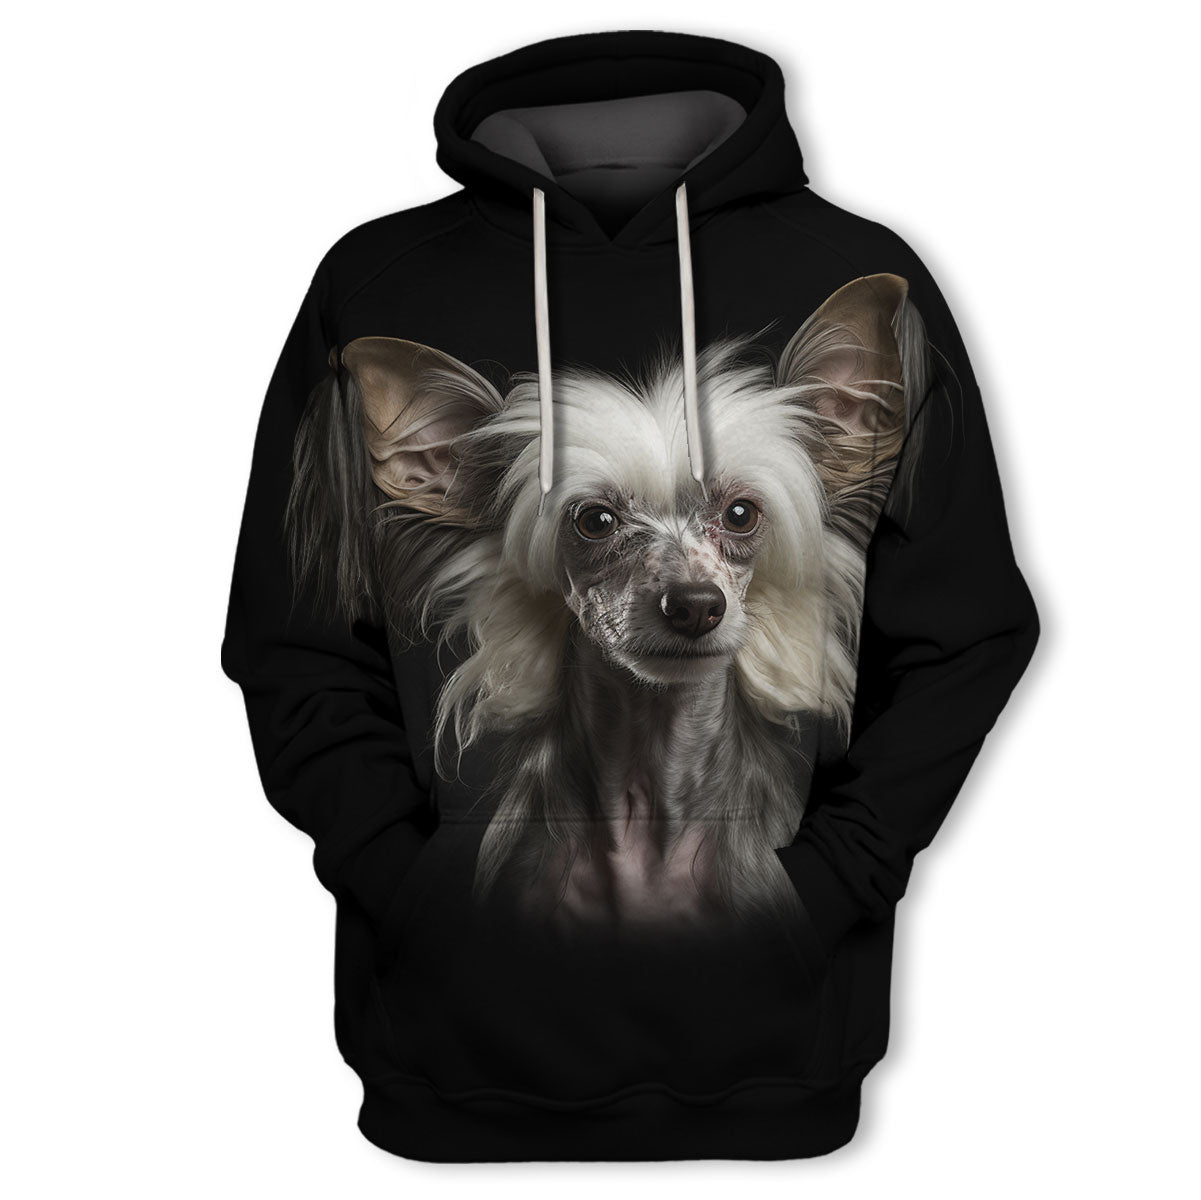 Chinese Crested - Unisex 3D Graphic Hoodie